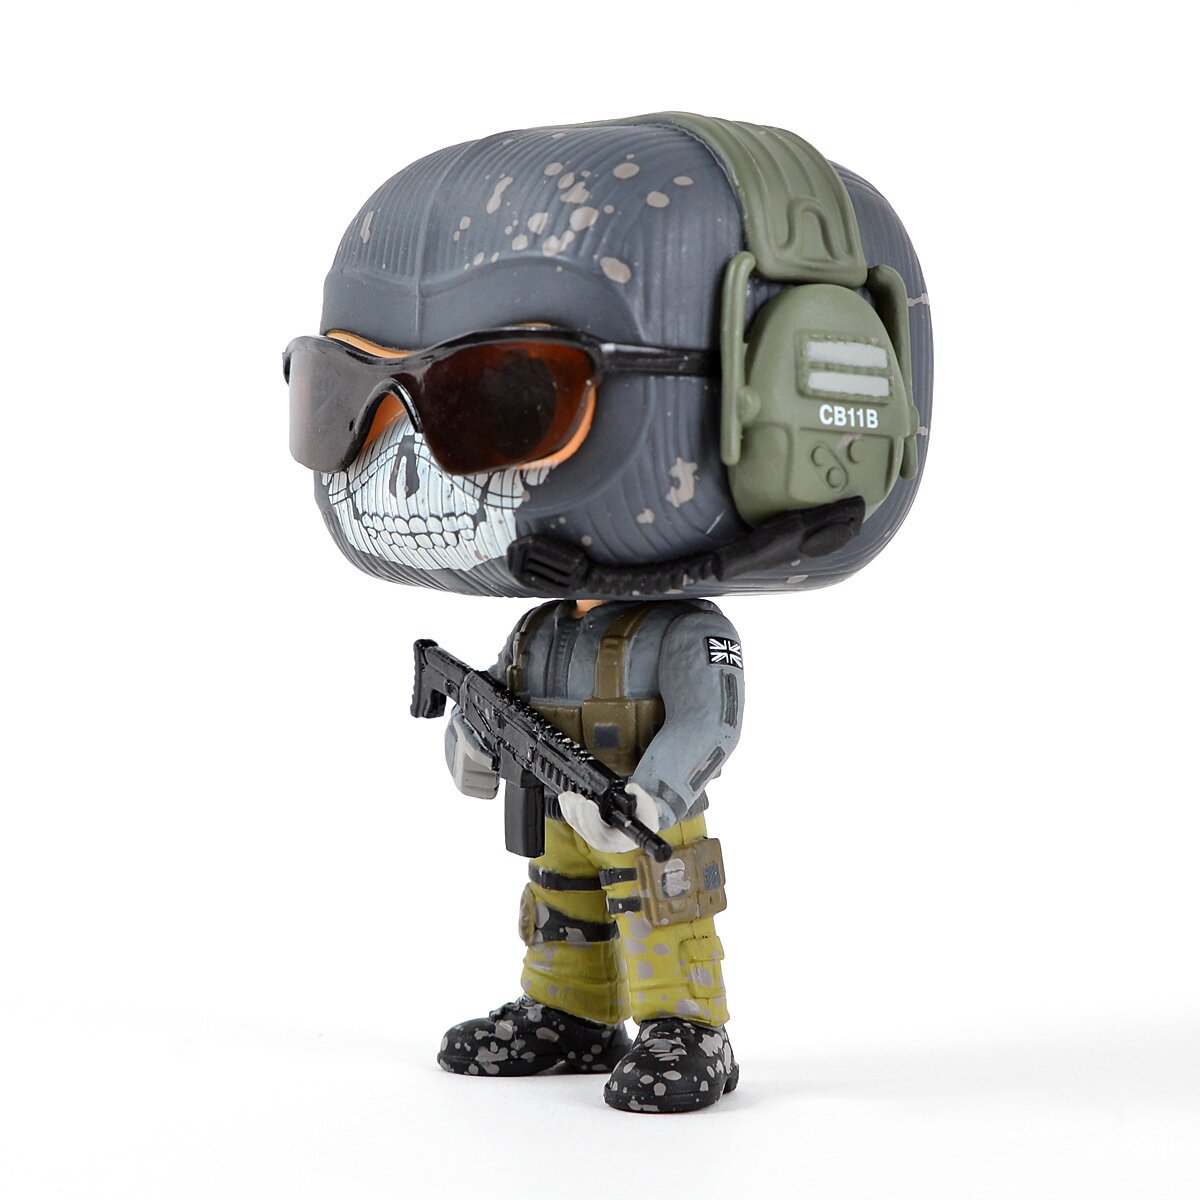 Pop! Games: Call of Duty - Ghost  Funko Universe, Planet of comics, games  and collecting.